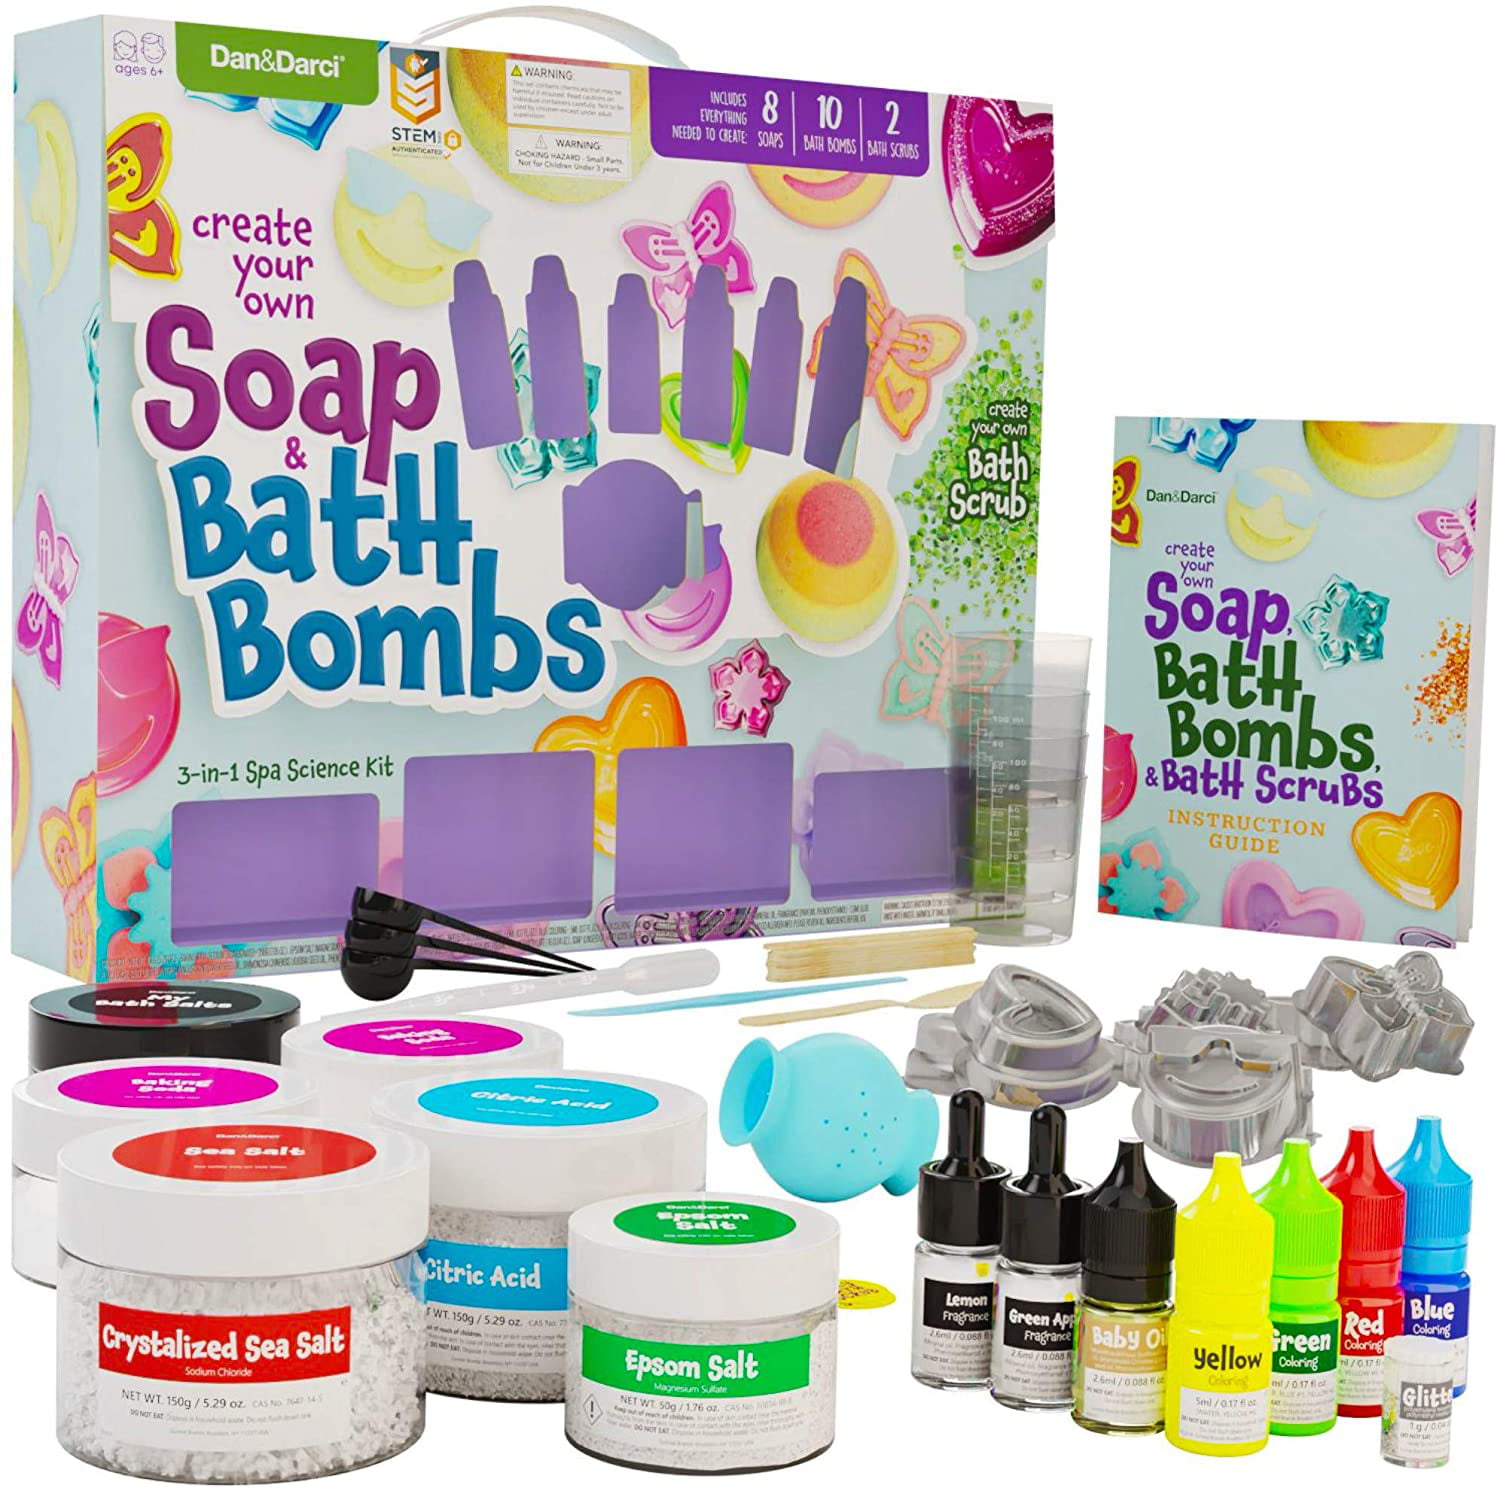 How to use your bath-bomb making kit - tutorial #3 - Making your bath-bombs!  - Lucy's Soap Kitchen Natural Skincare Blog